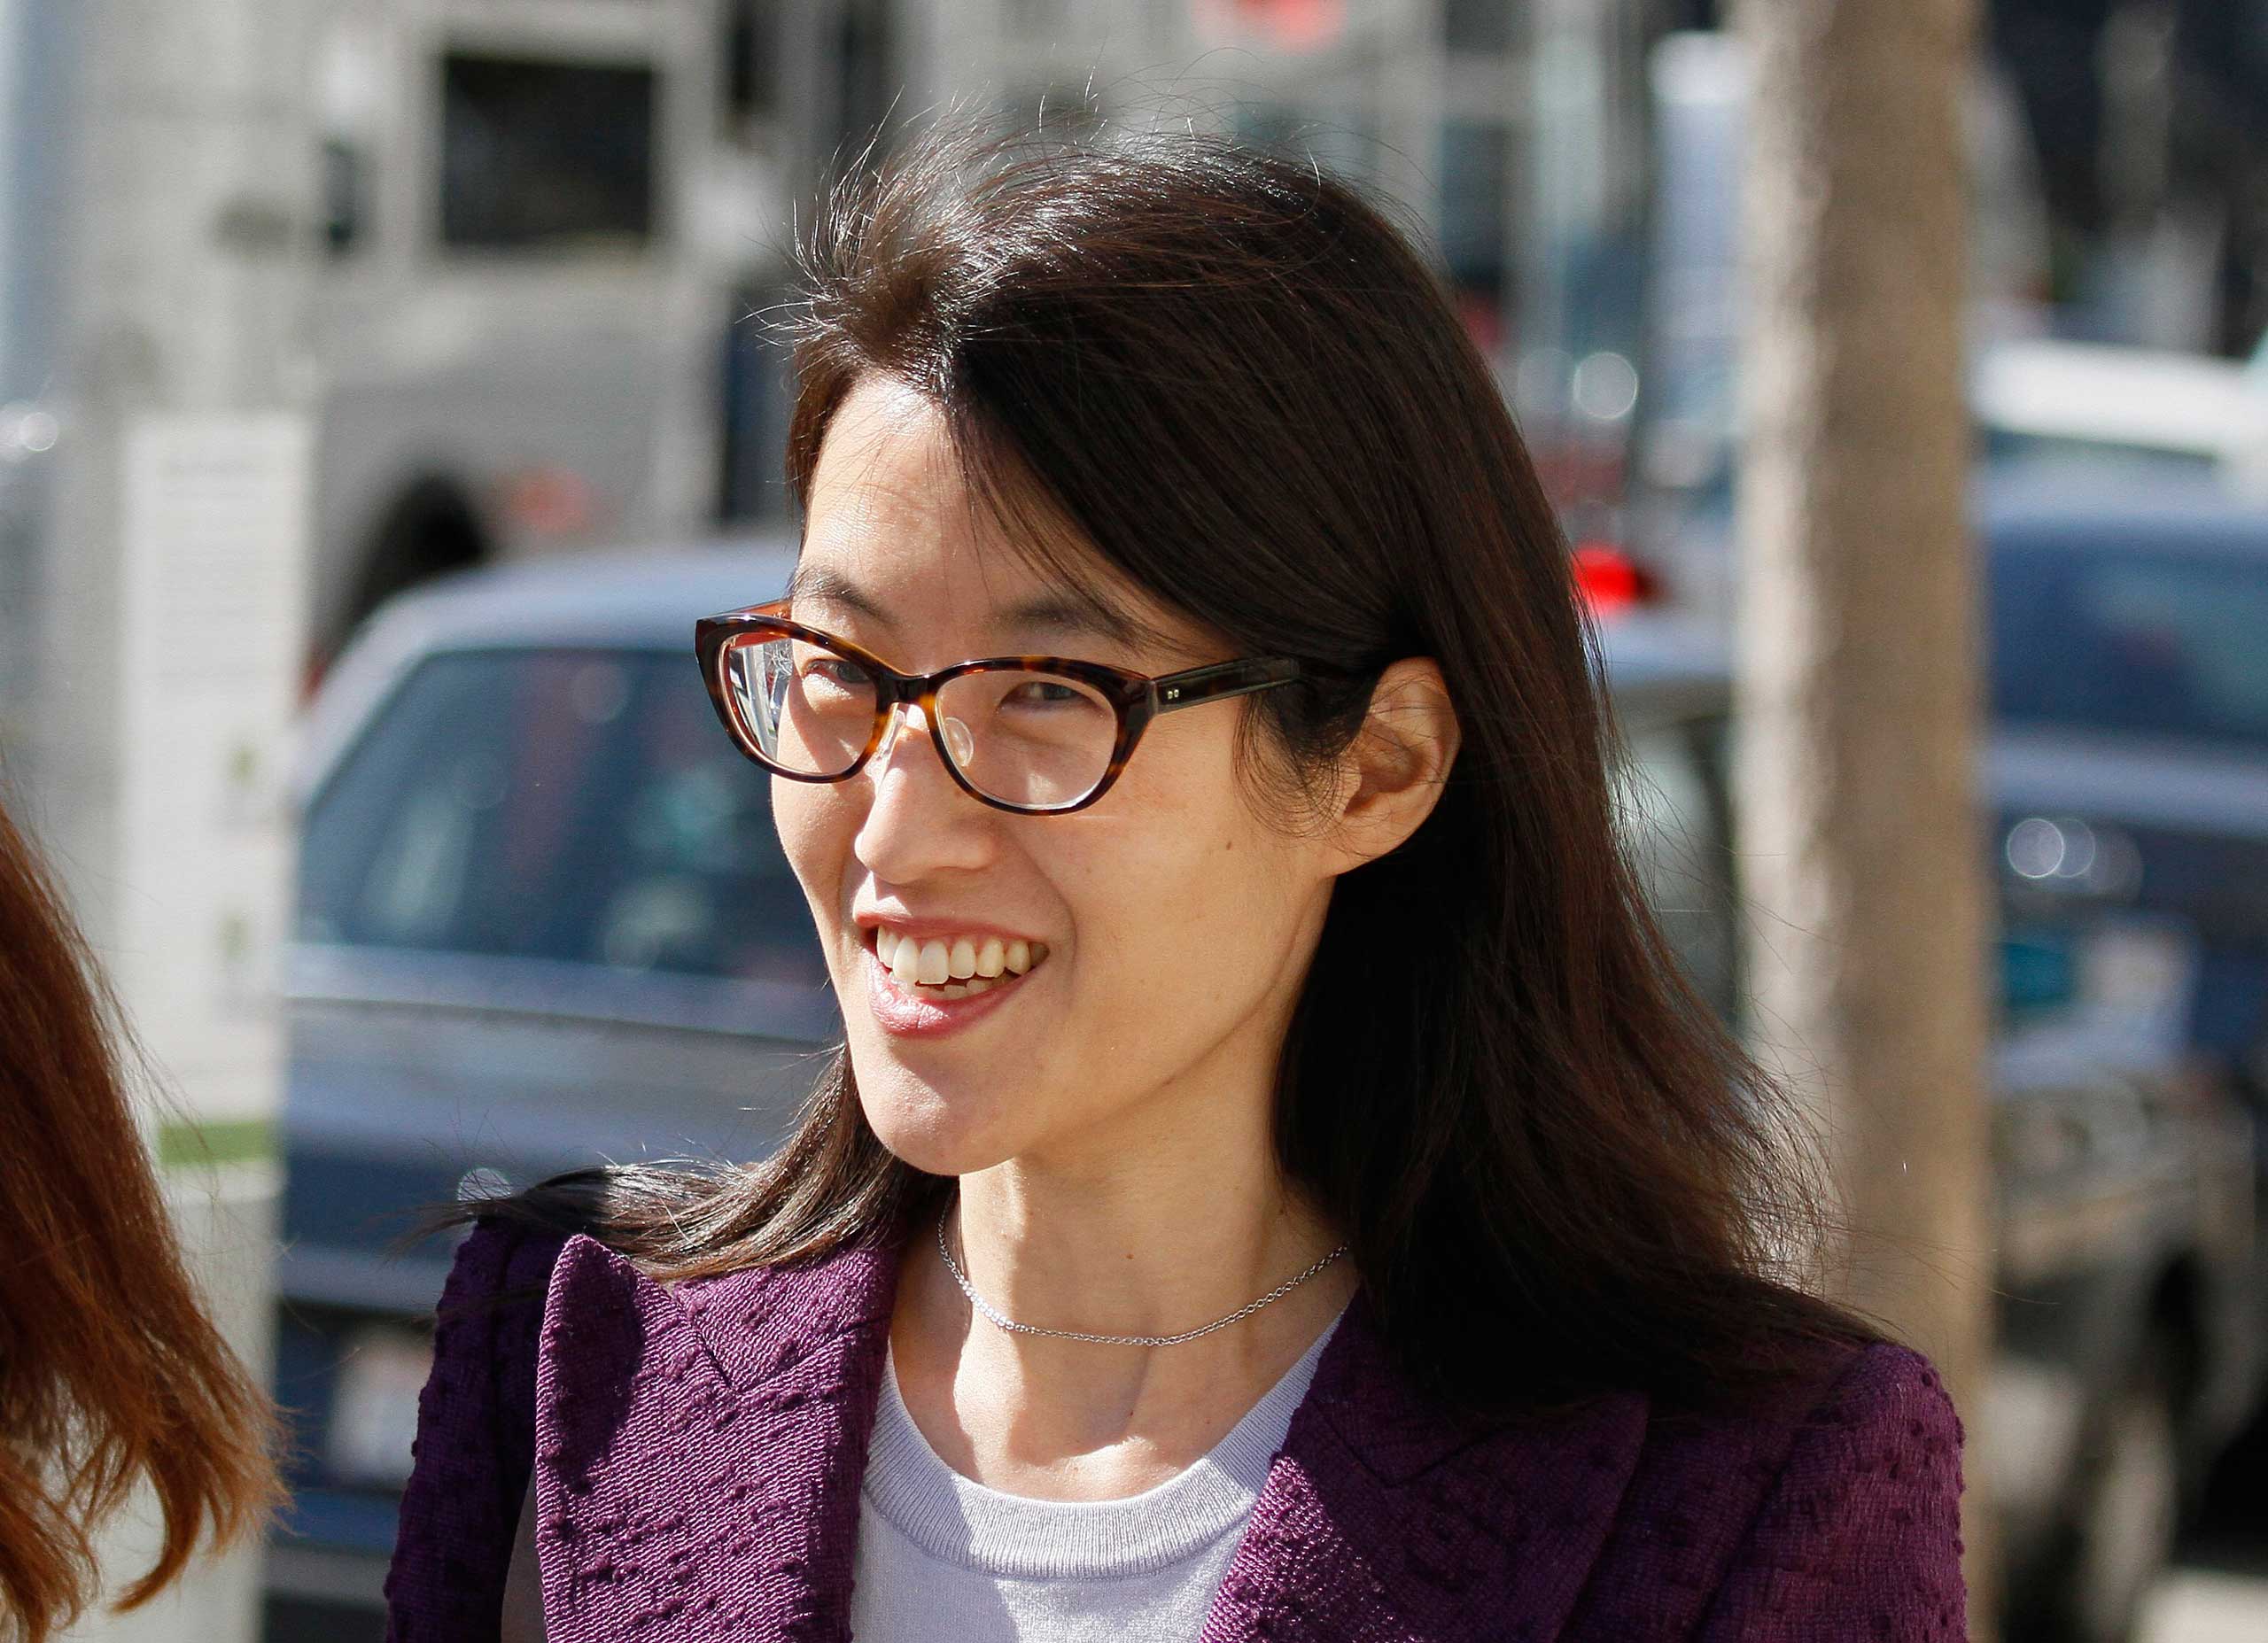 Ellen Pao leaves the Civic Center Courthouse during a lunch break in her trial in San Francisco on Feb. 24, 2015.